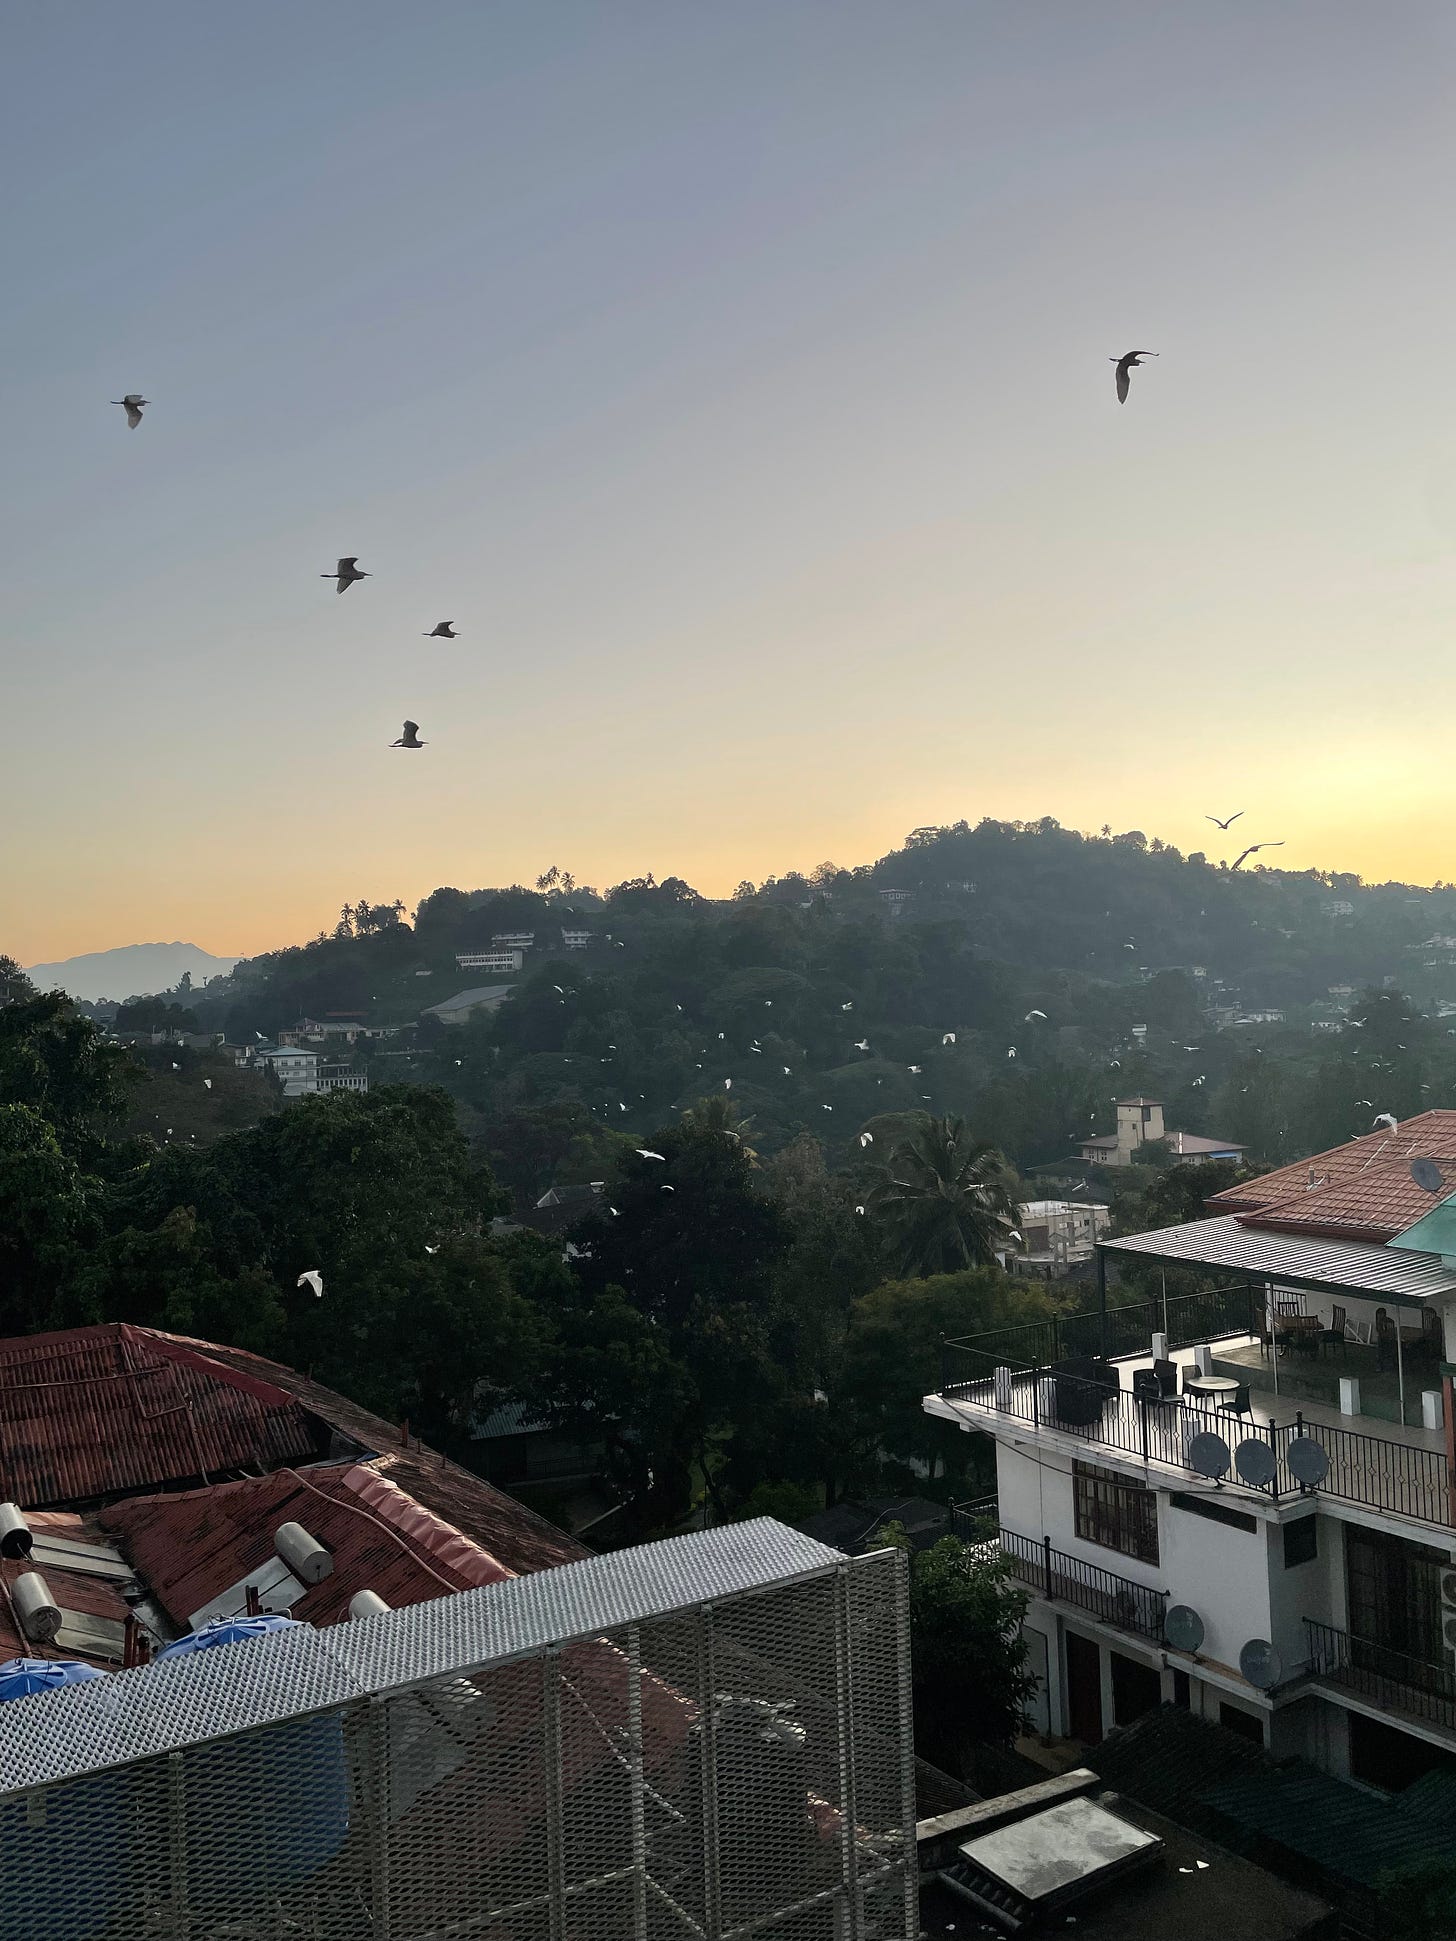 Birds move west over the trees and houses as the sun rises over the hills in the distance.